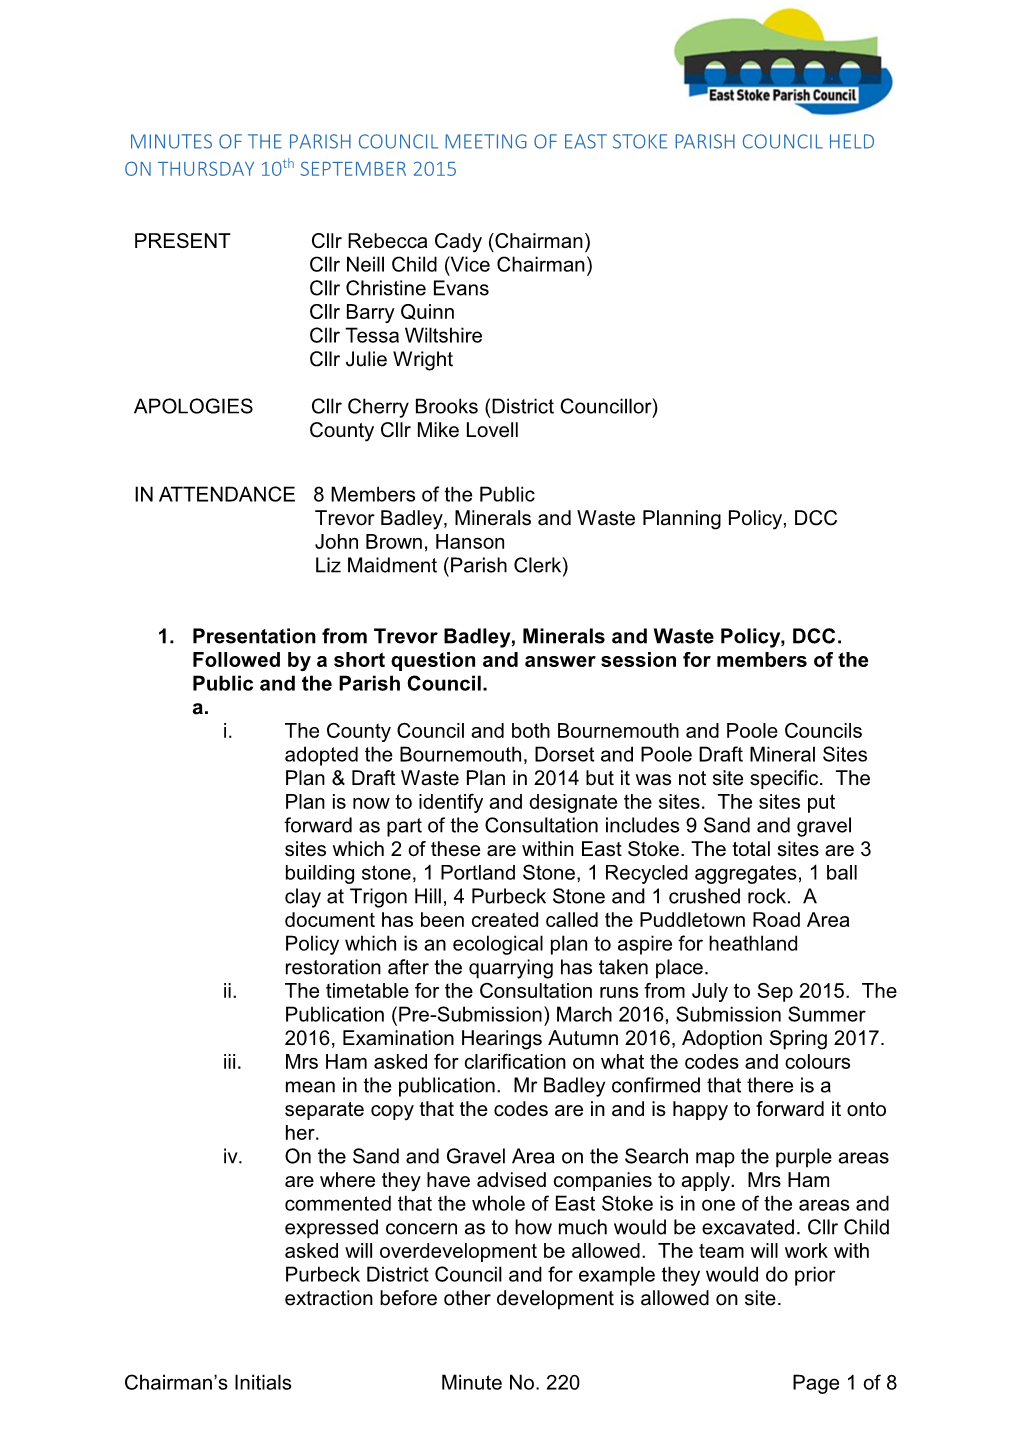 MINUTES of the PARISH COUNCIL MEETING of EAST STOKE PARISH COUNCIL HELD on THURSDAY 10Th SEPTEMBER 2015